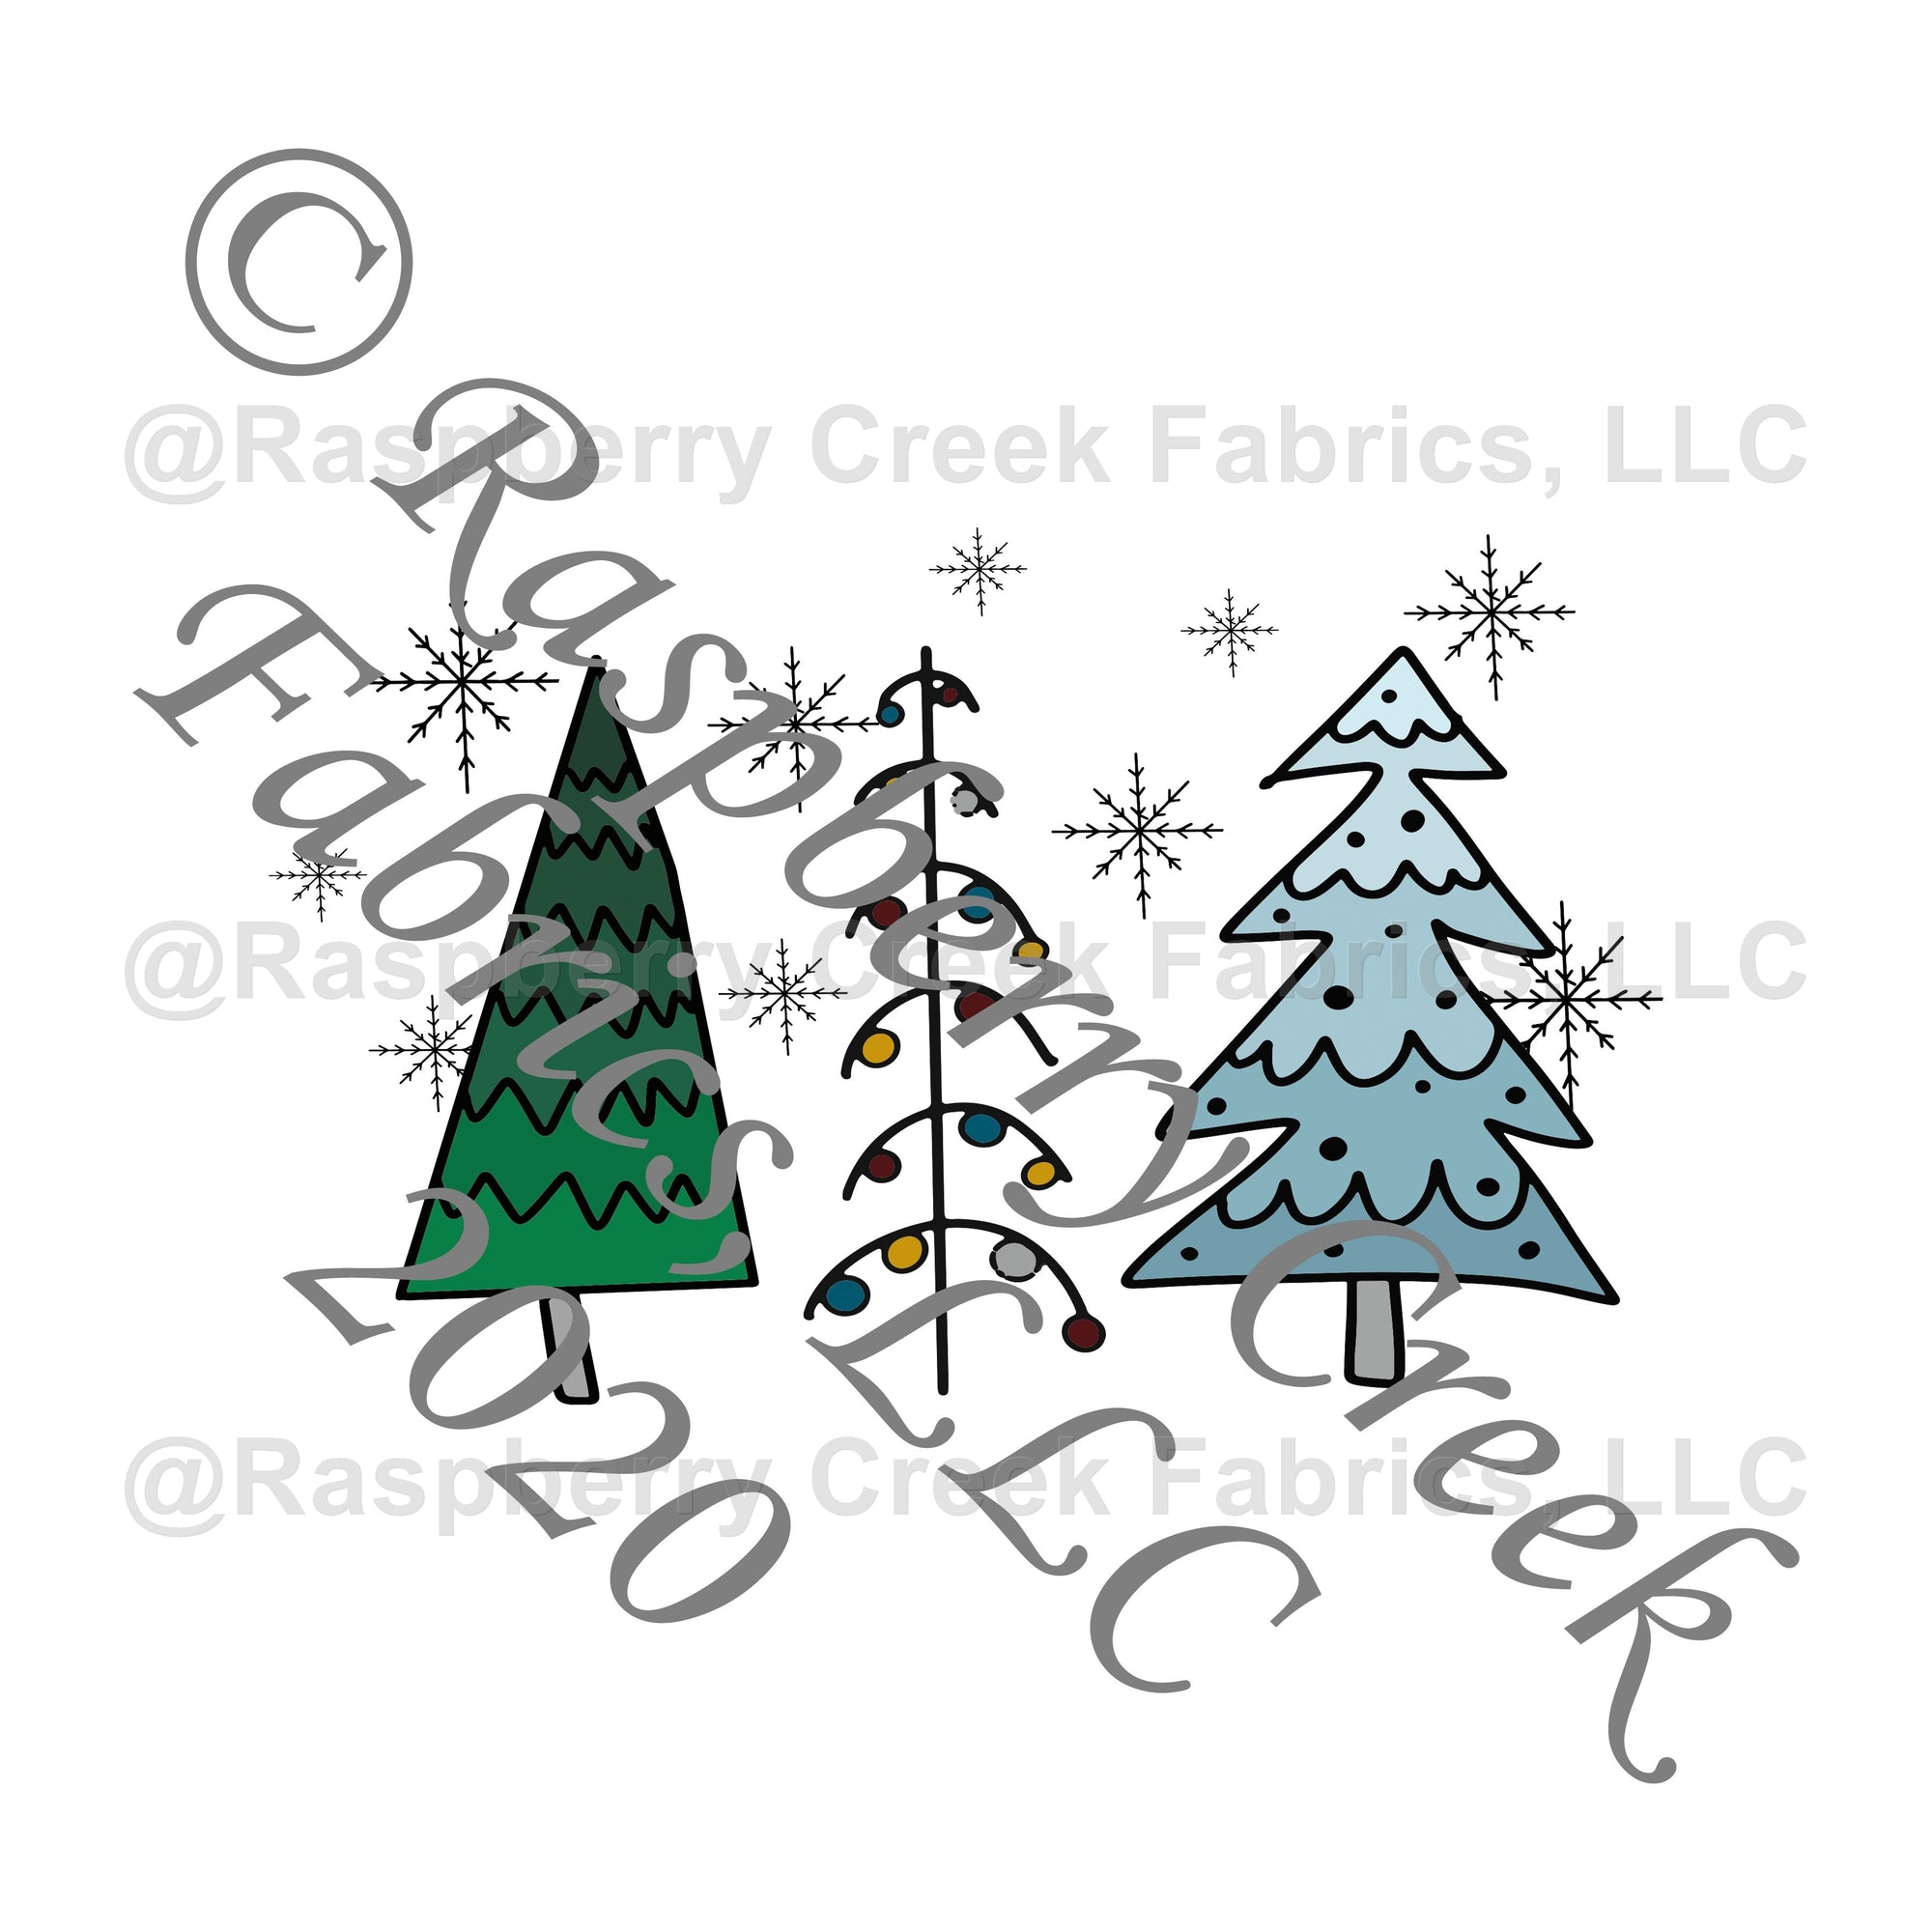 Tonal Teal Grey and Green Christmas Tree Panel, Christmas Trimmings By Brielle Carlson for Club Fabrics Fabric, Raspberry Creek Fabrics, watermarked